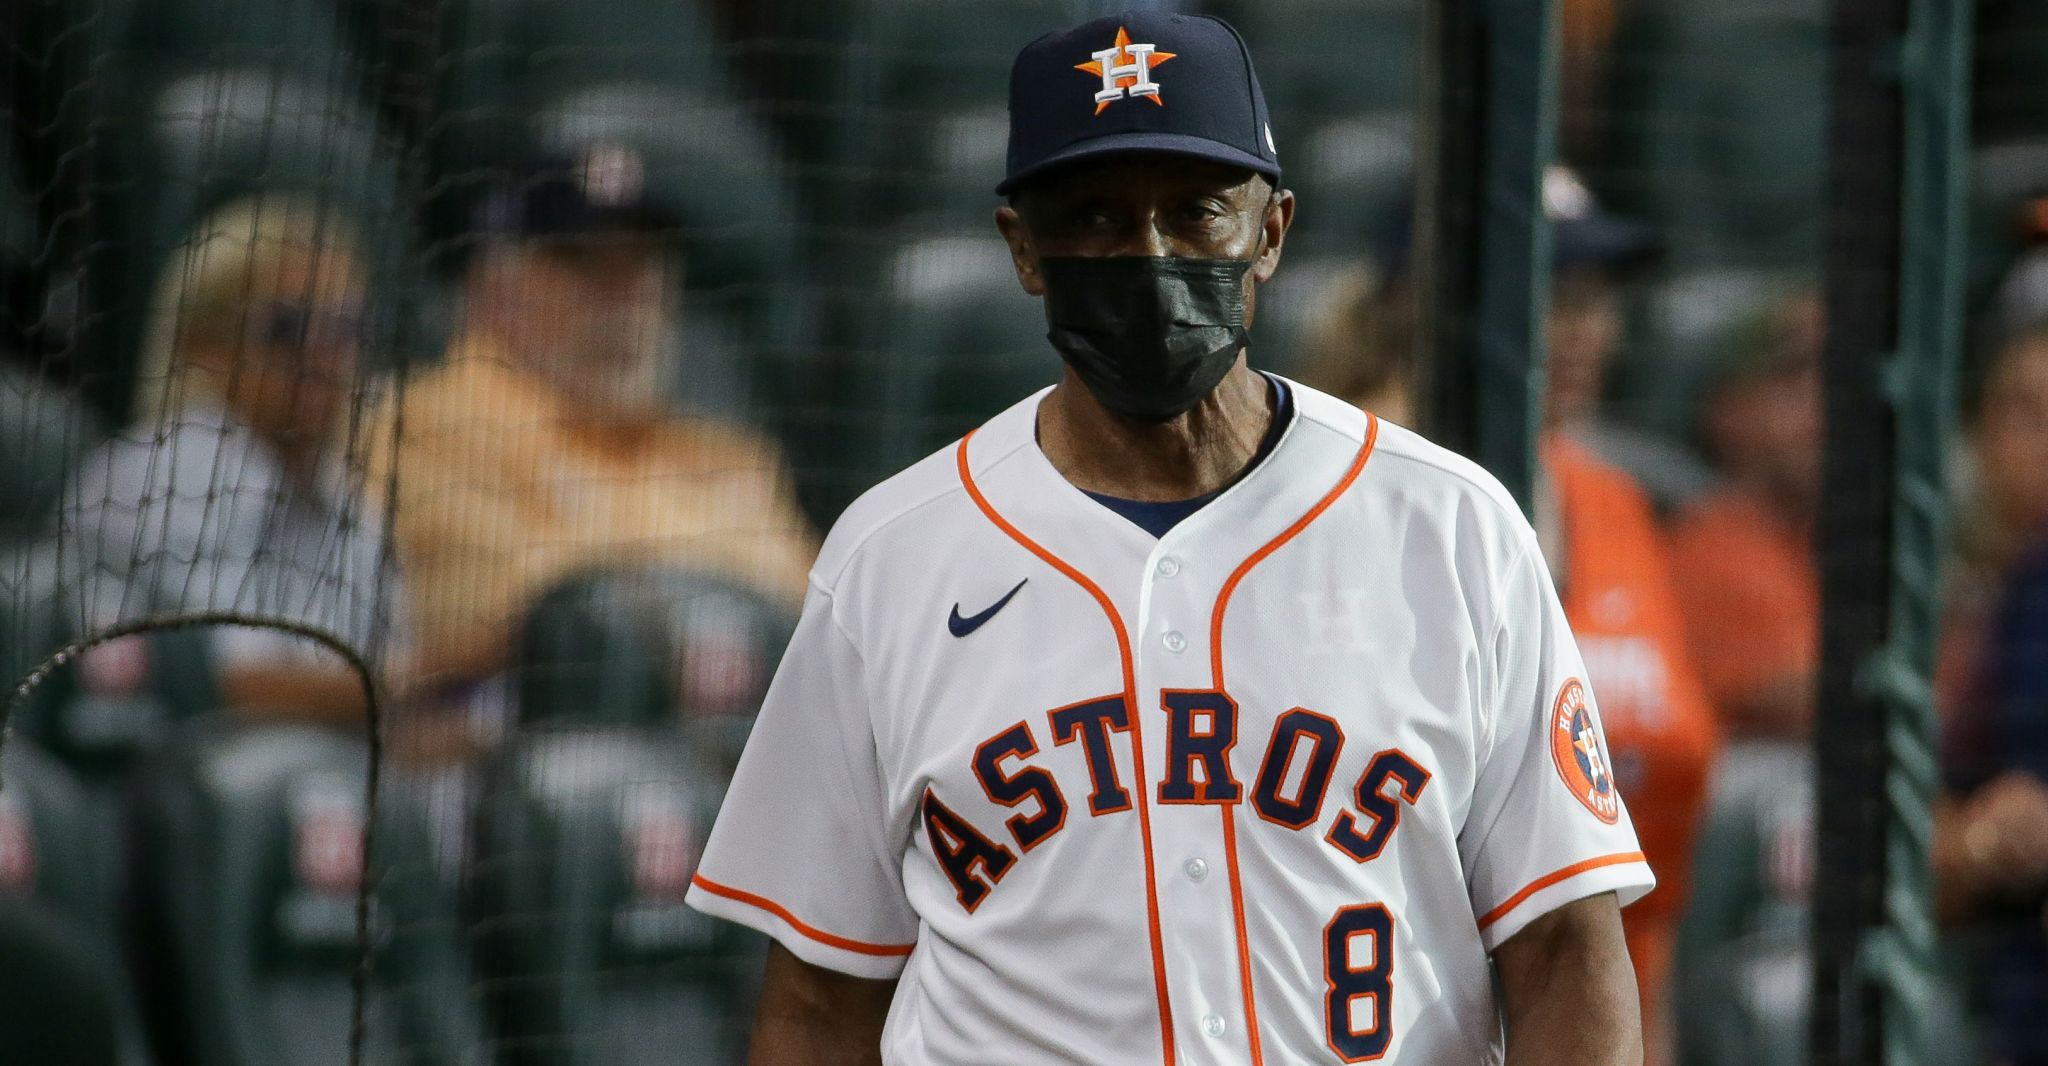 Astros third-base coach Gary Pettis' return to be delayed